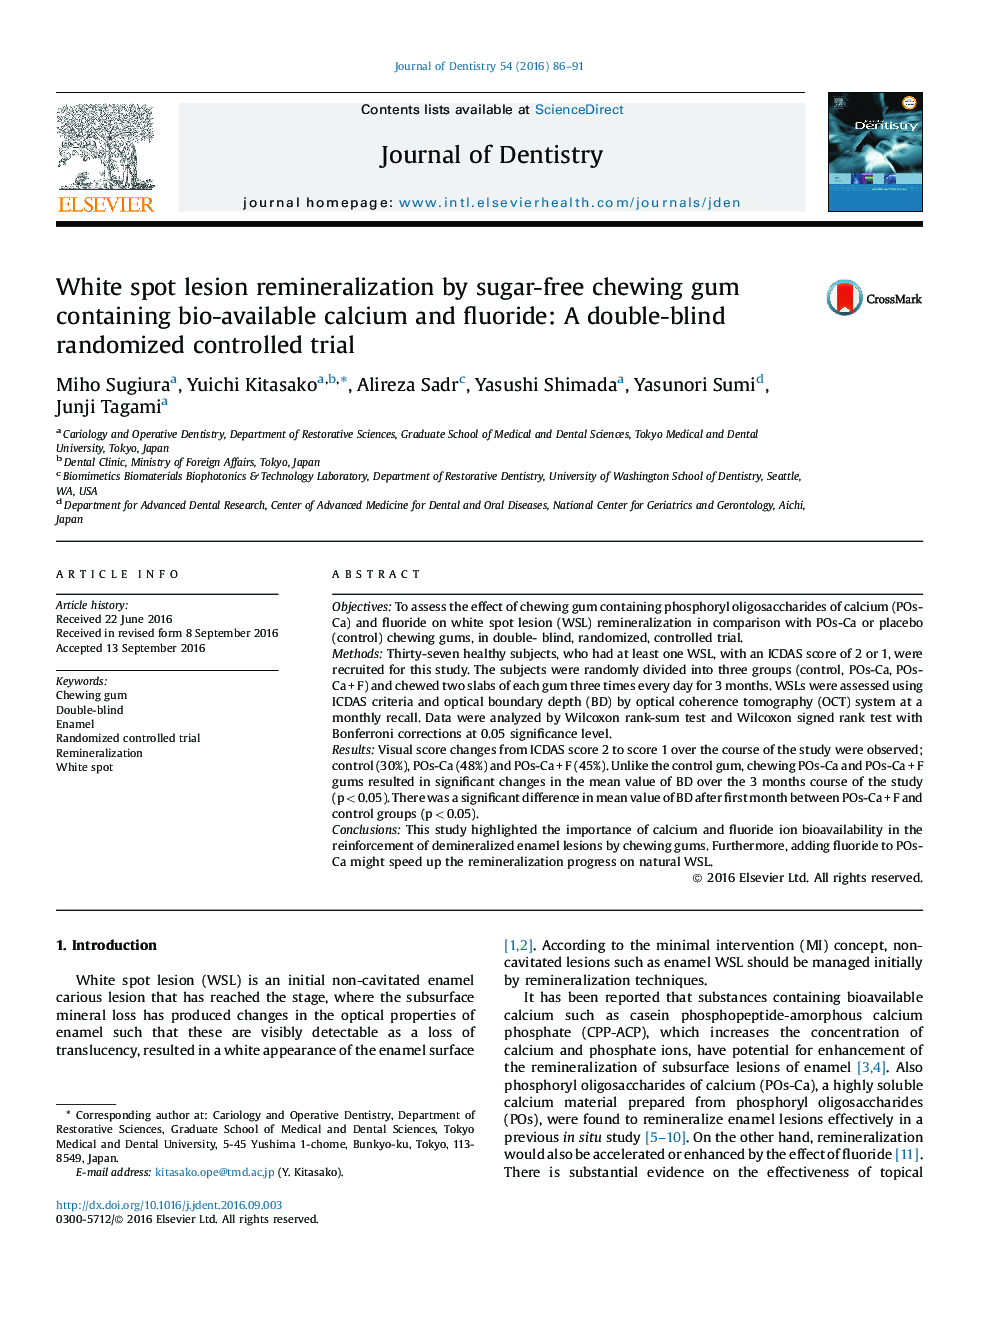 White spot lesion remineralization by sugar-free chewing gum containing bio-available calcium and fluoride: A double-blind randomized controlled trial